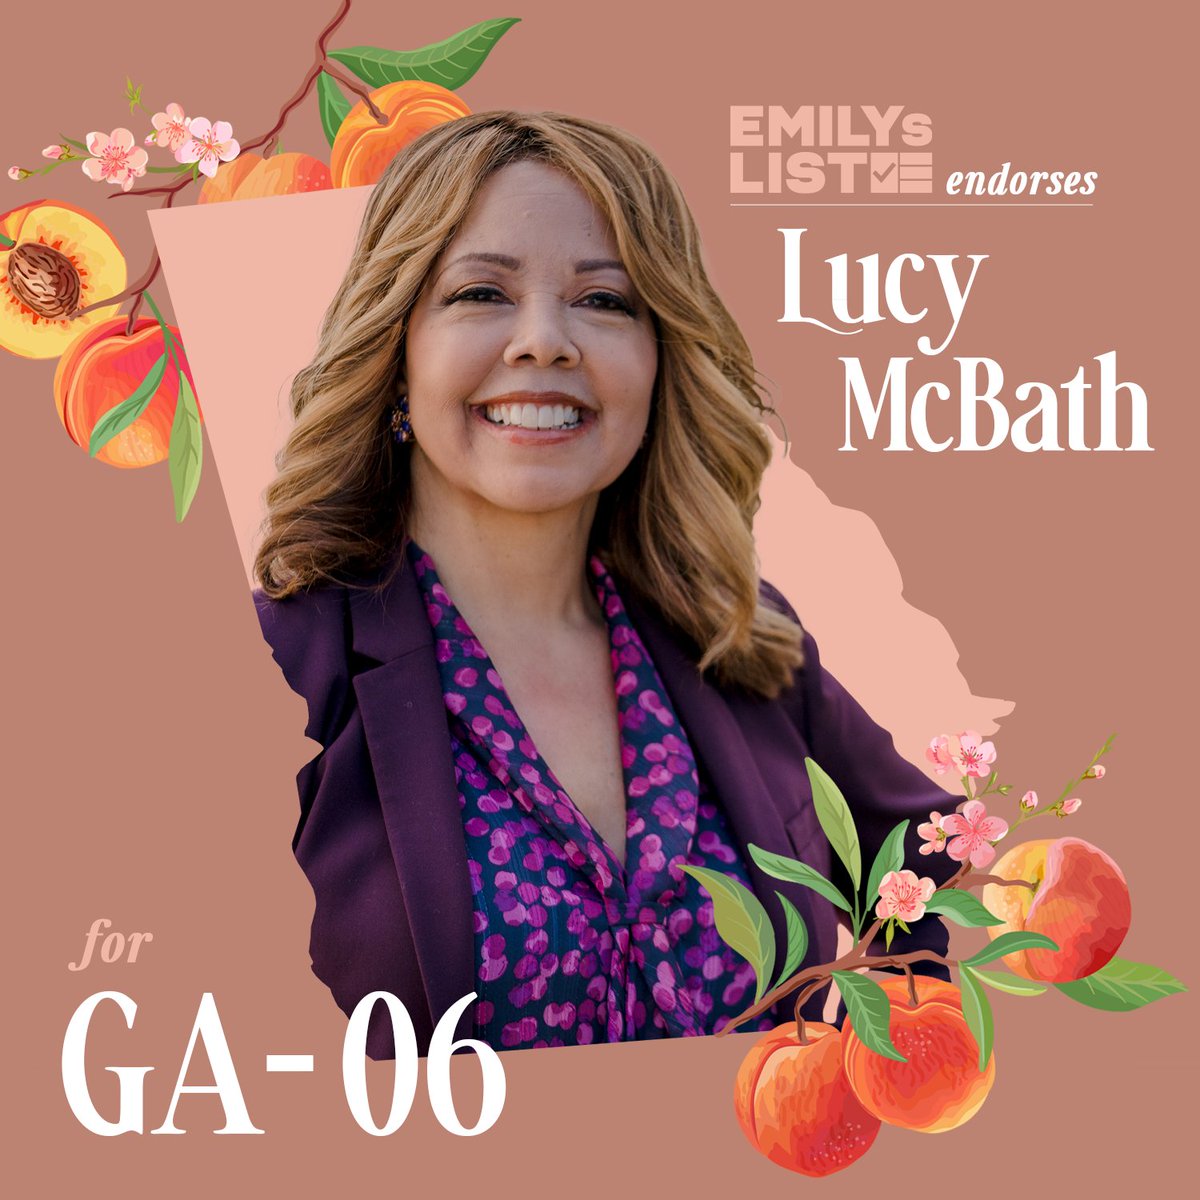 Today, we’re proud to endorse Lucy McBath for reelection to Congress in Georgia’s 6th Congressional District!